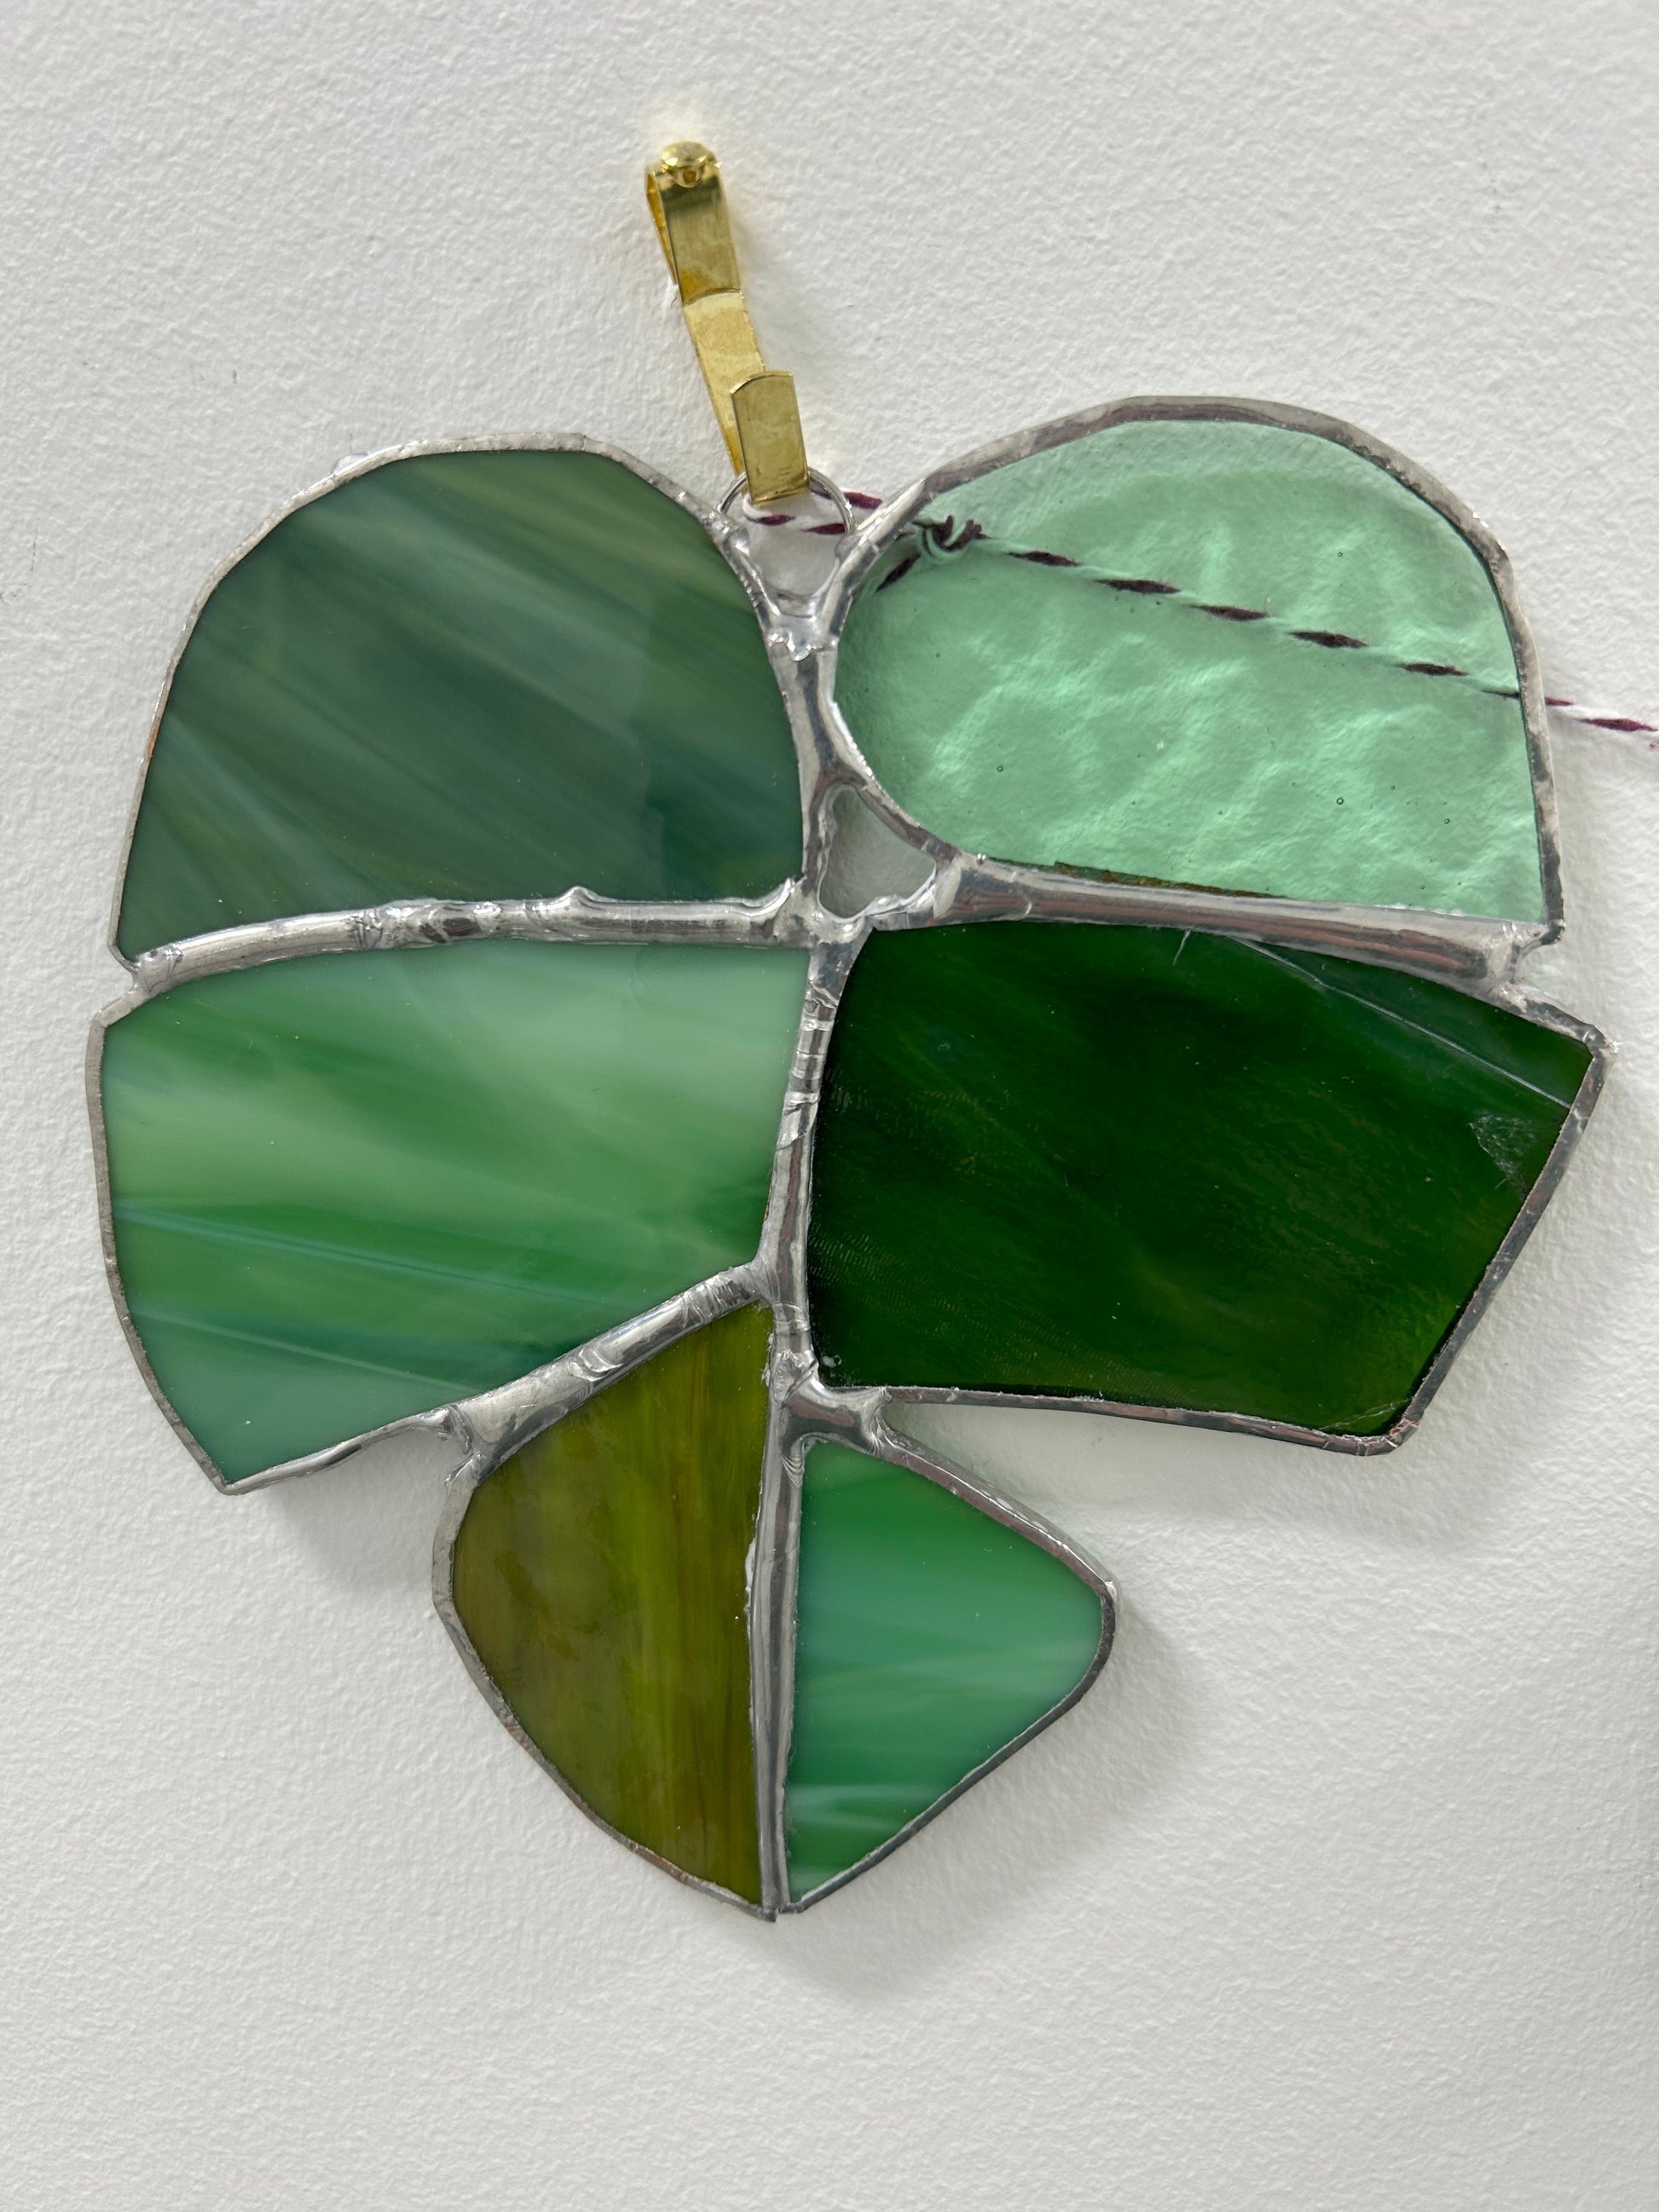 Stained Glass for Beginners - December 5 - www